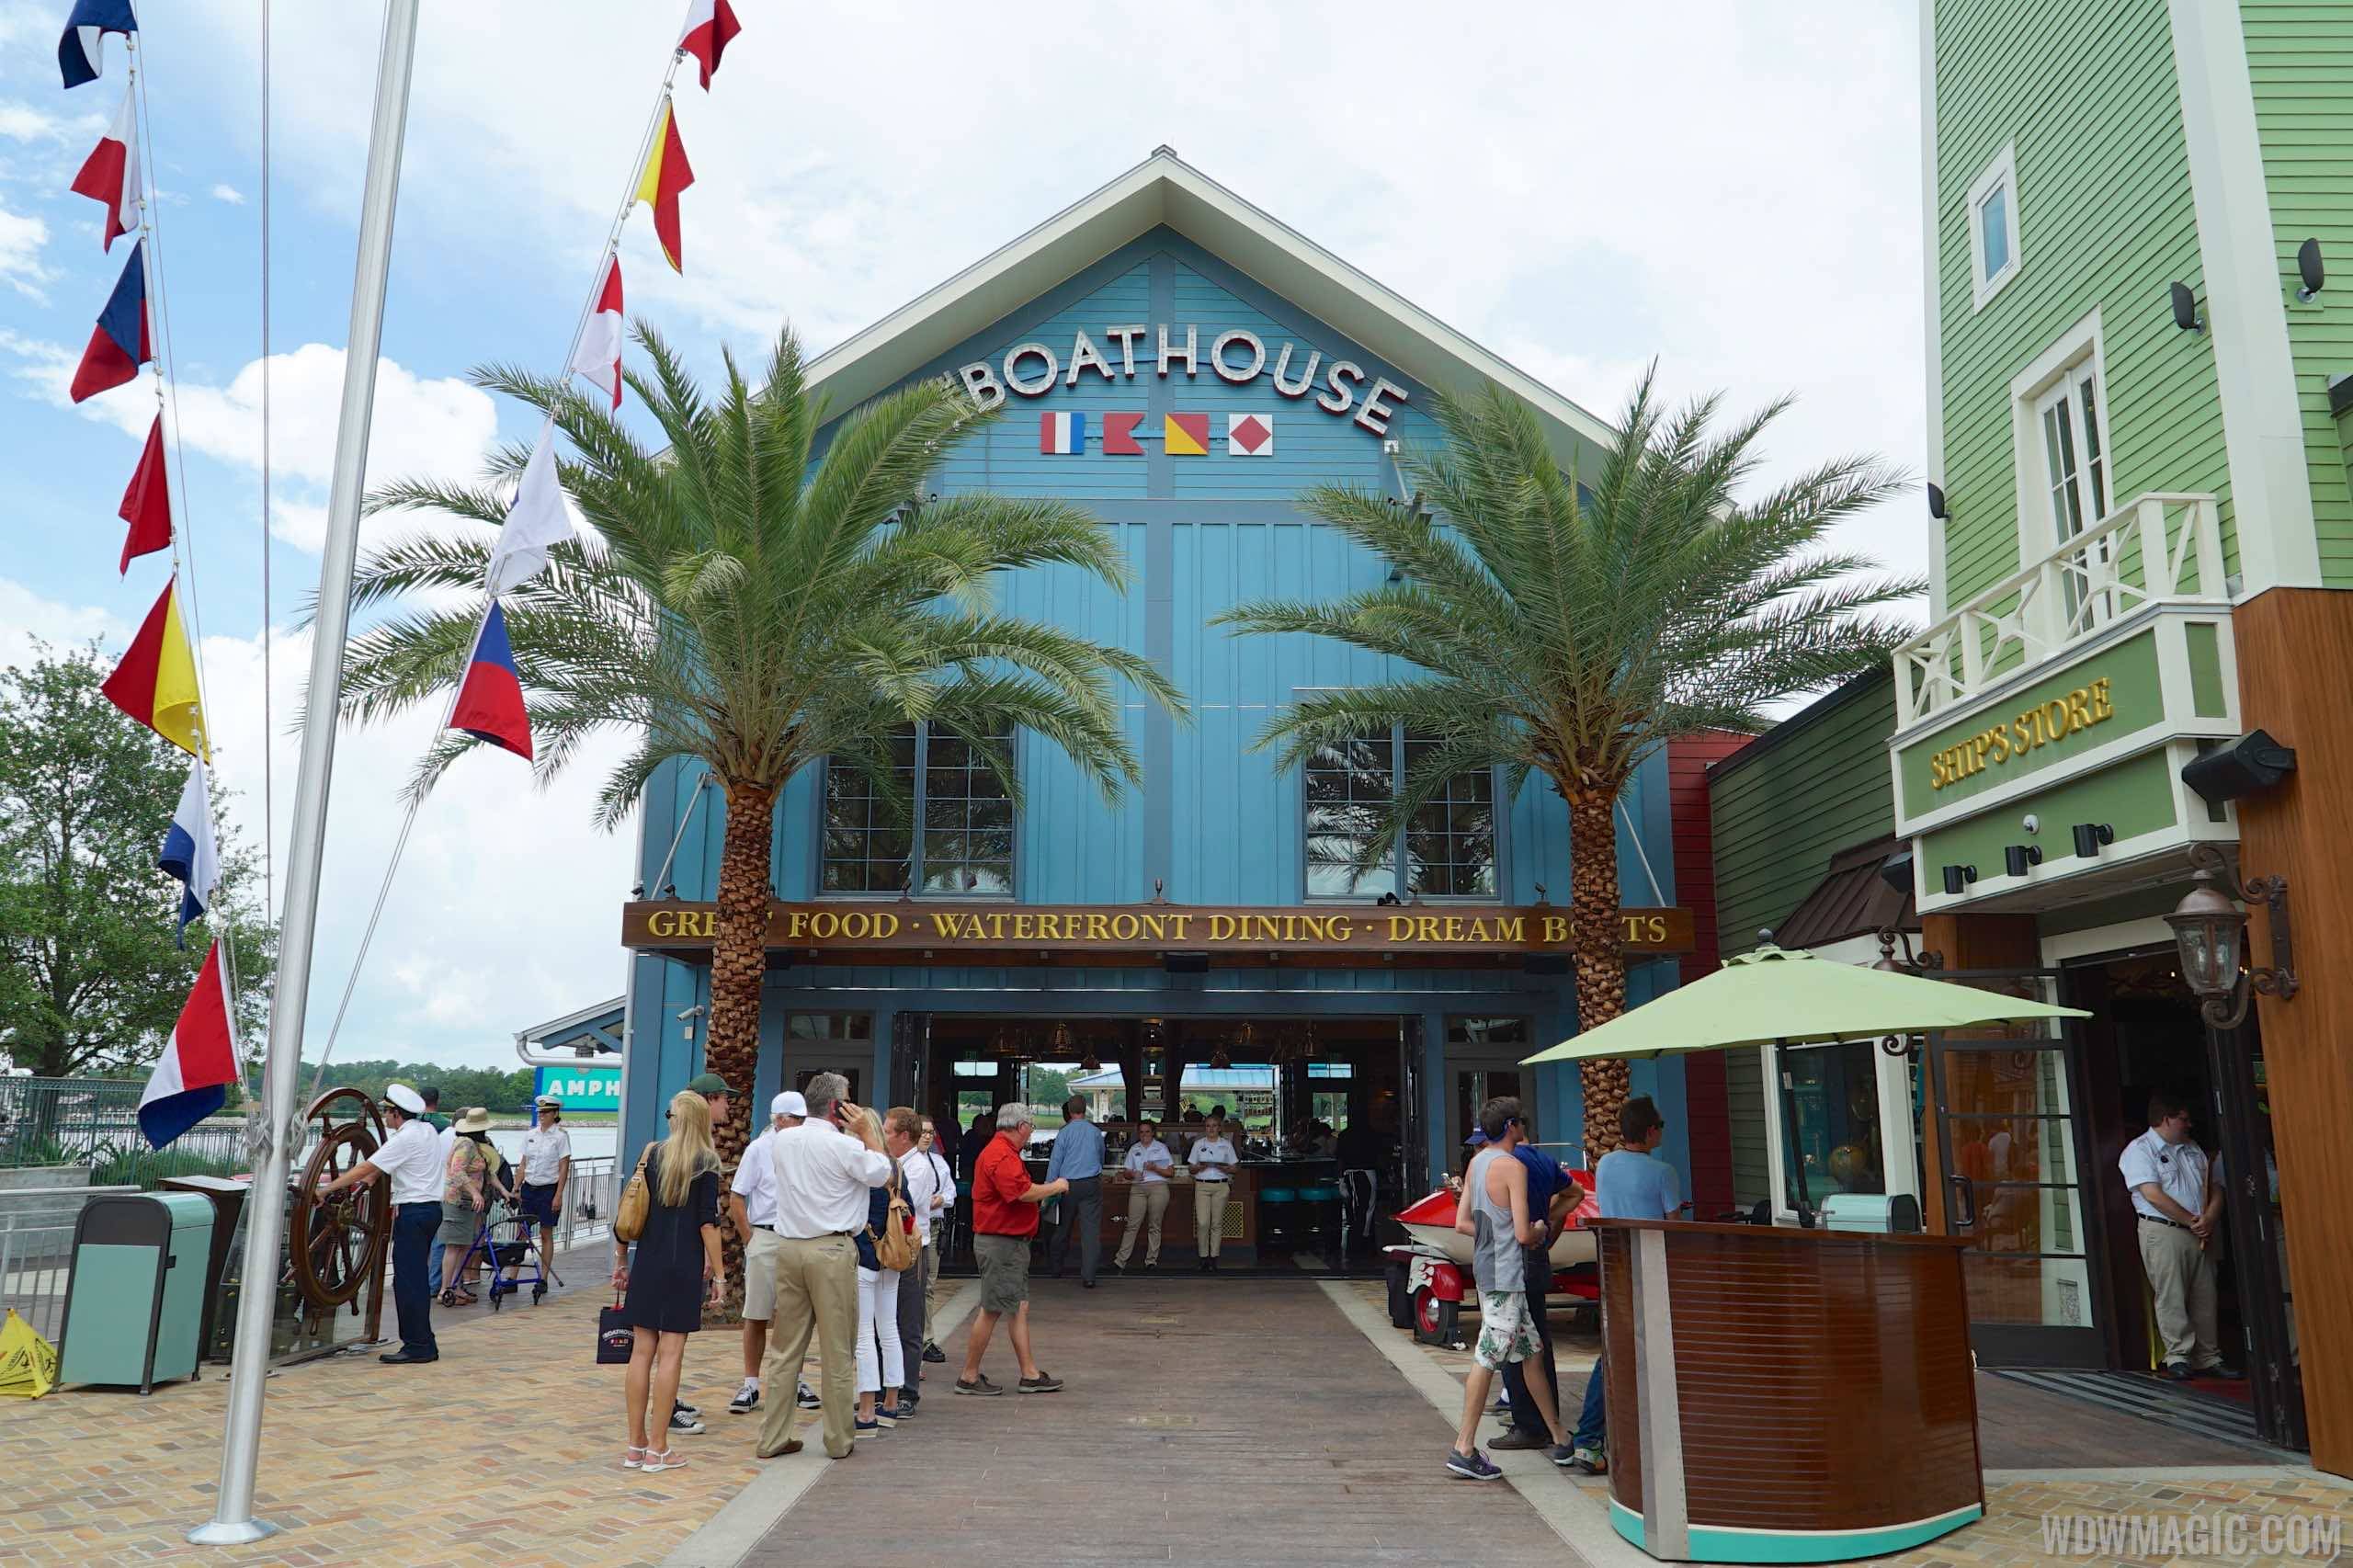 PHOTOS - Grand opening day photo tour of The BOATHOUSE at Disney Springs